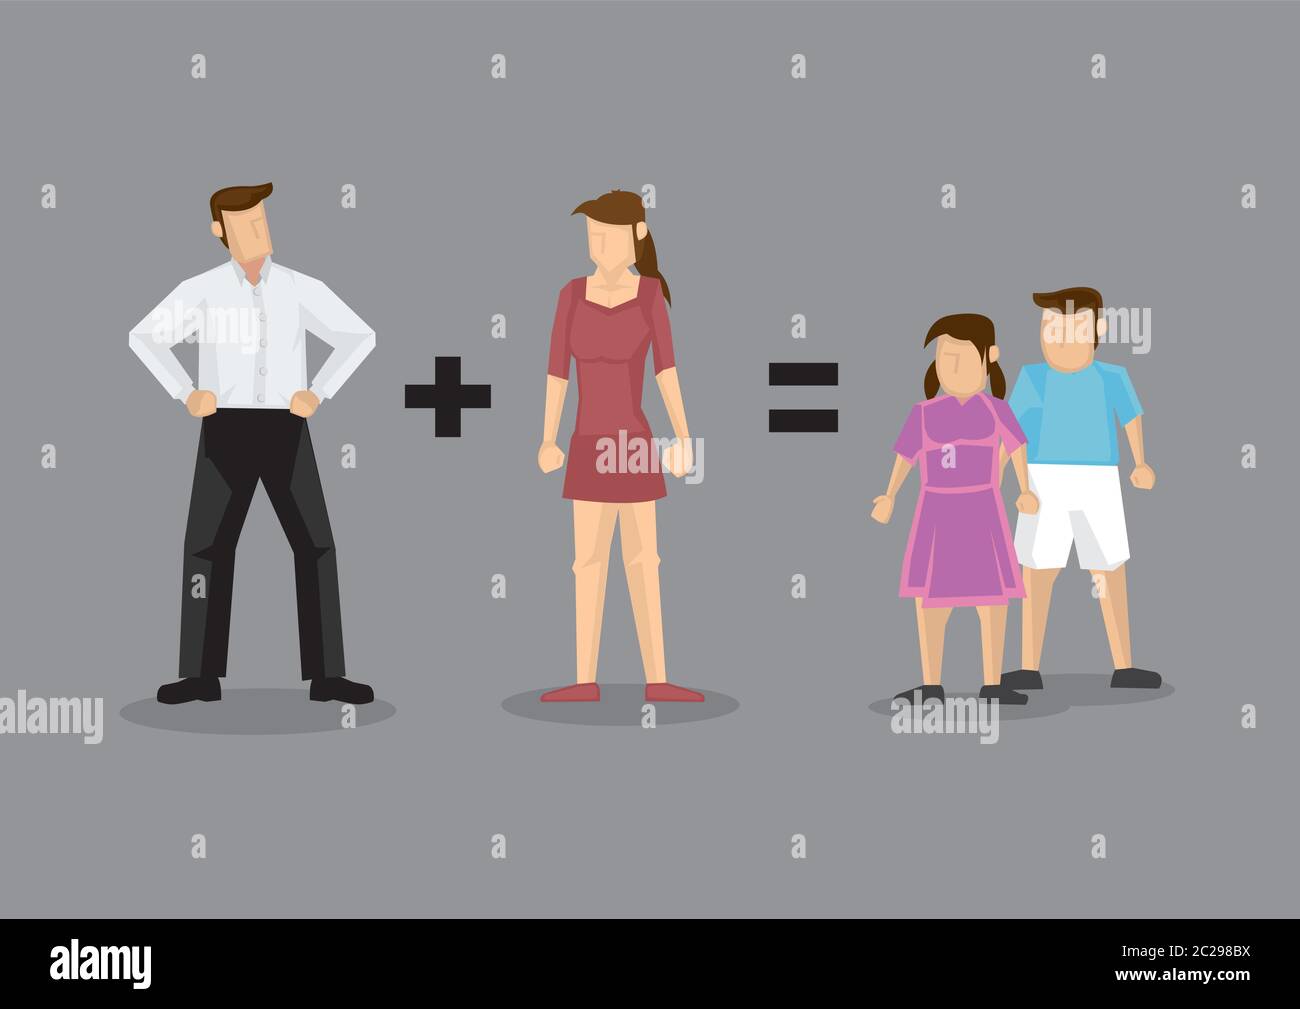 Father plus mother equal children. Creative vector illustration for family concept isolated on grey background. Stock Vector